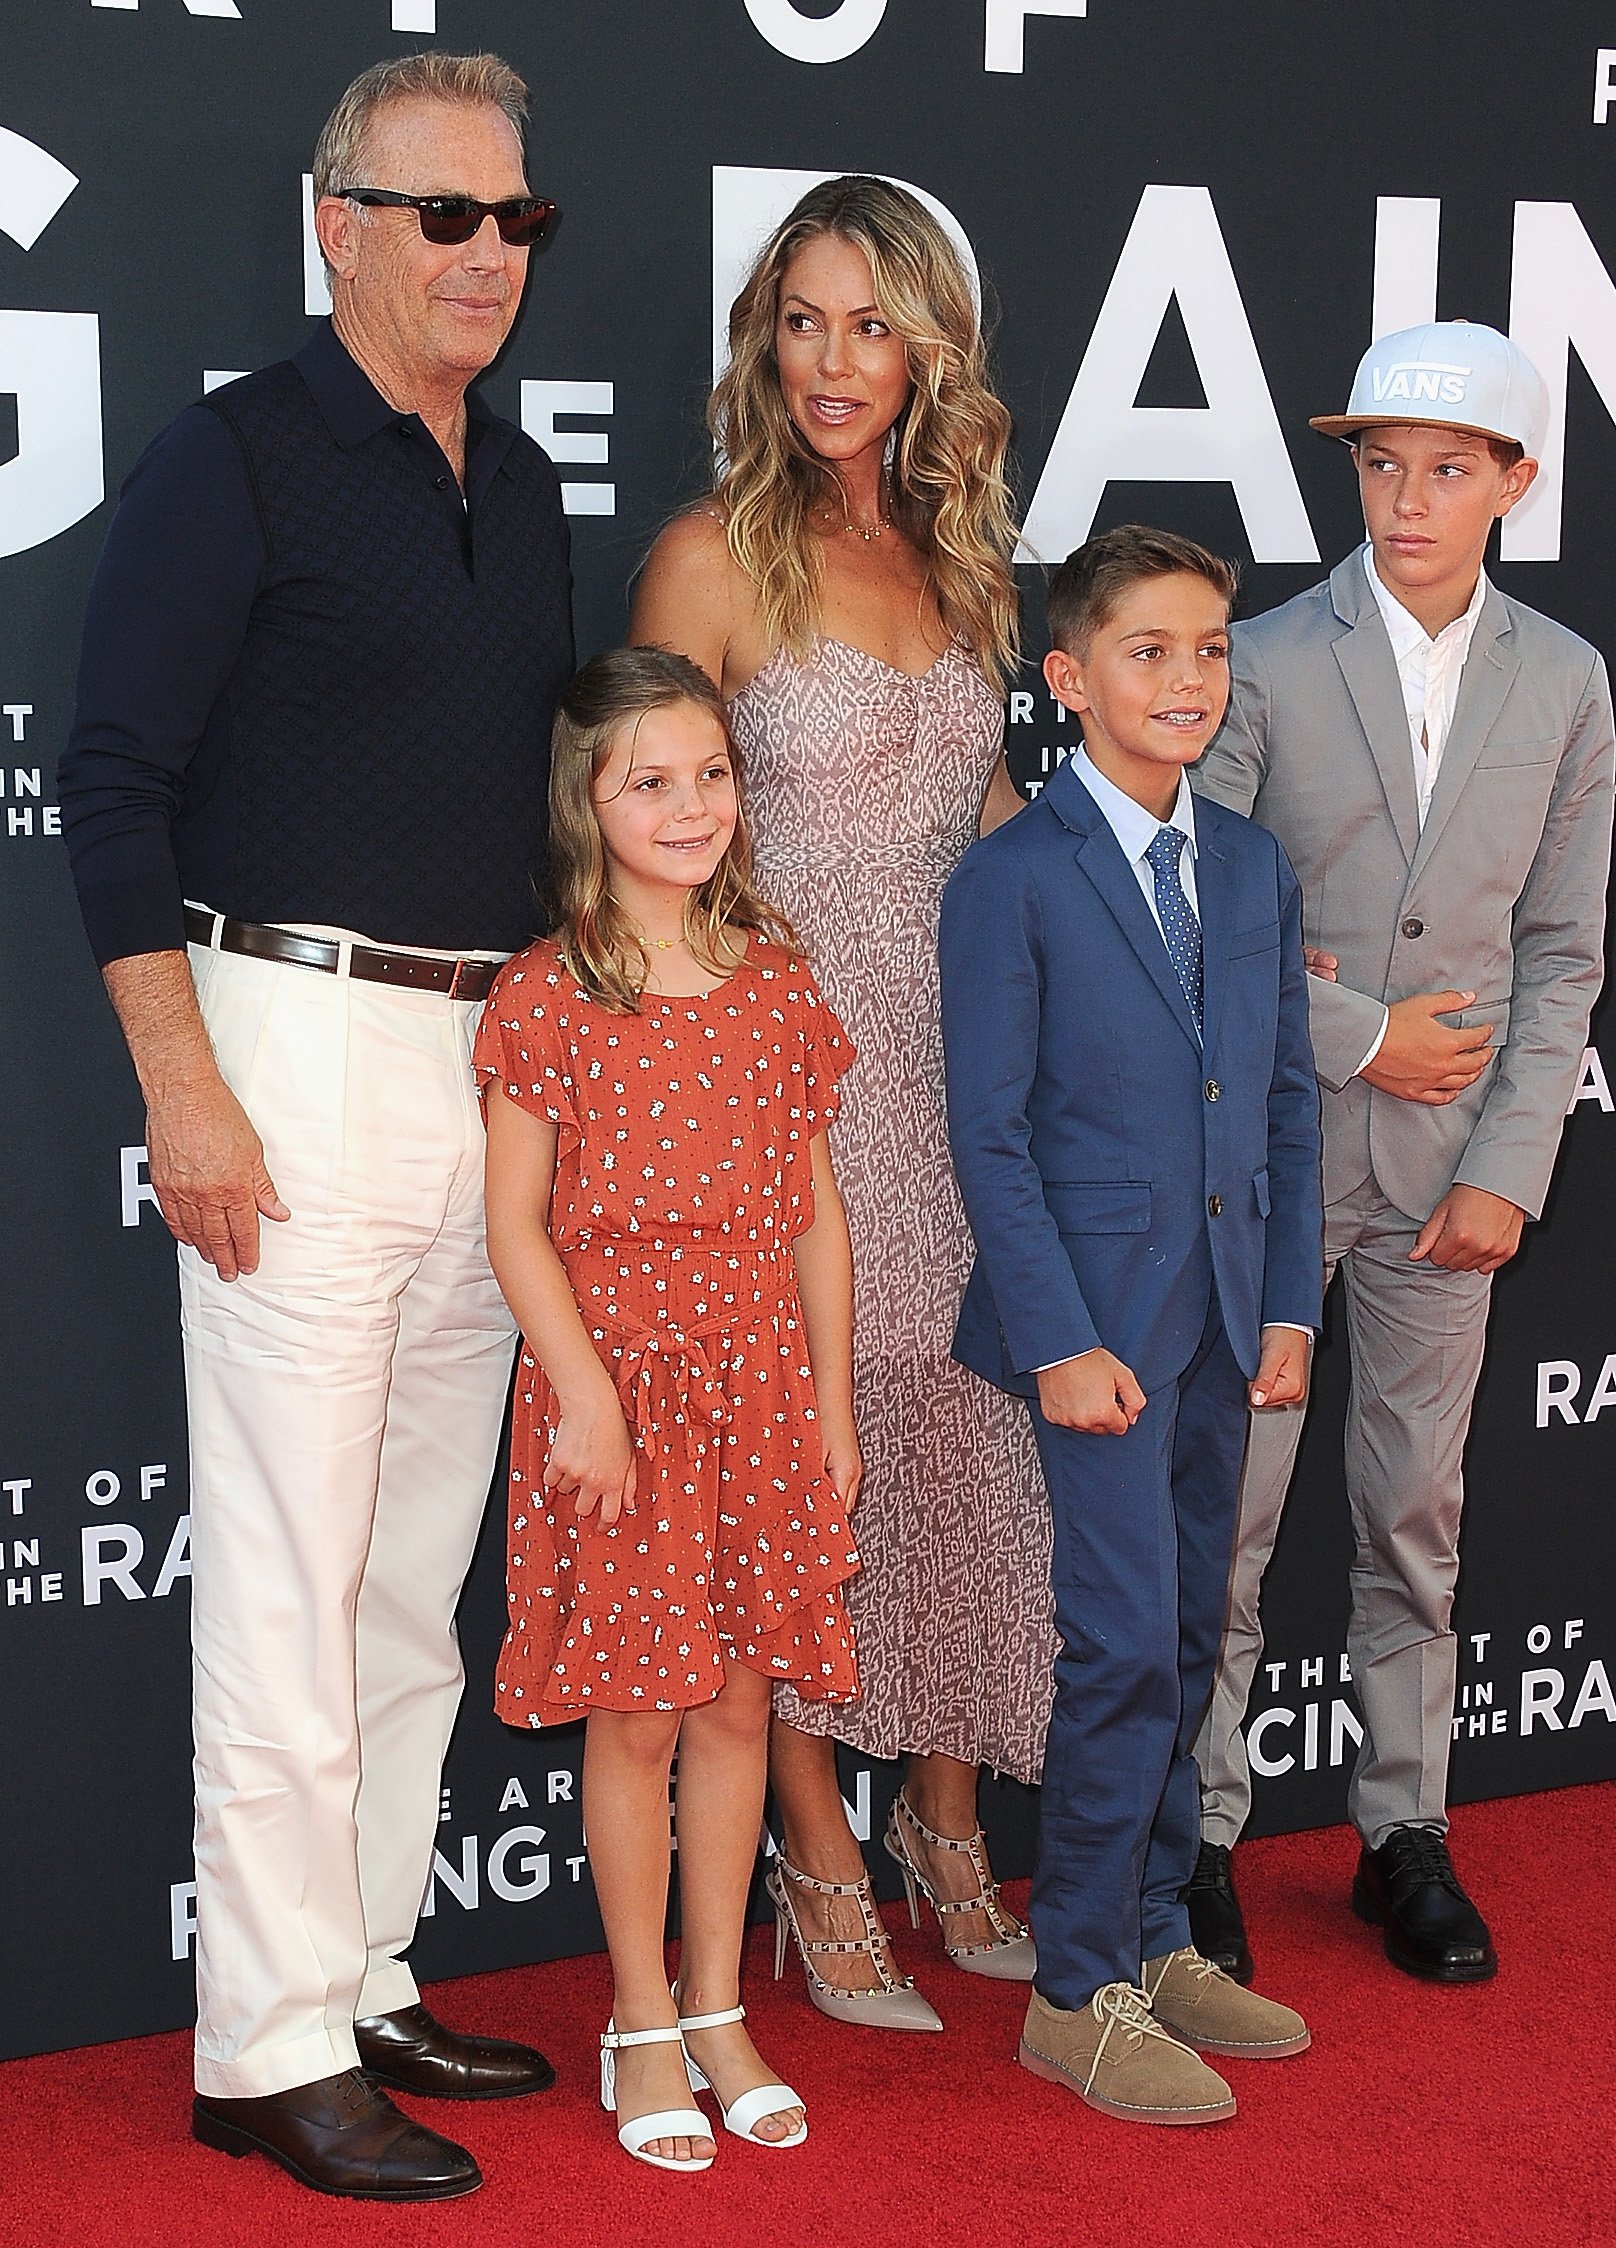 Cayden Costner and his family at the premiere of “The Art Of Racing In The Rain” | Source: Getty Images